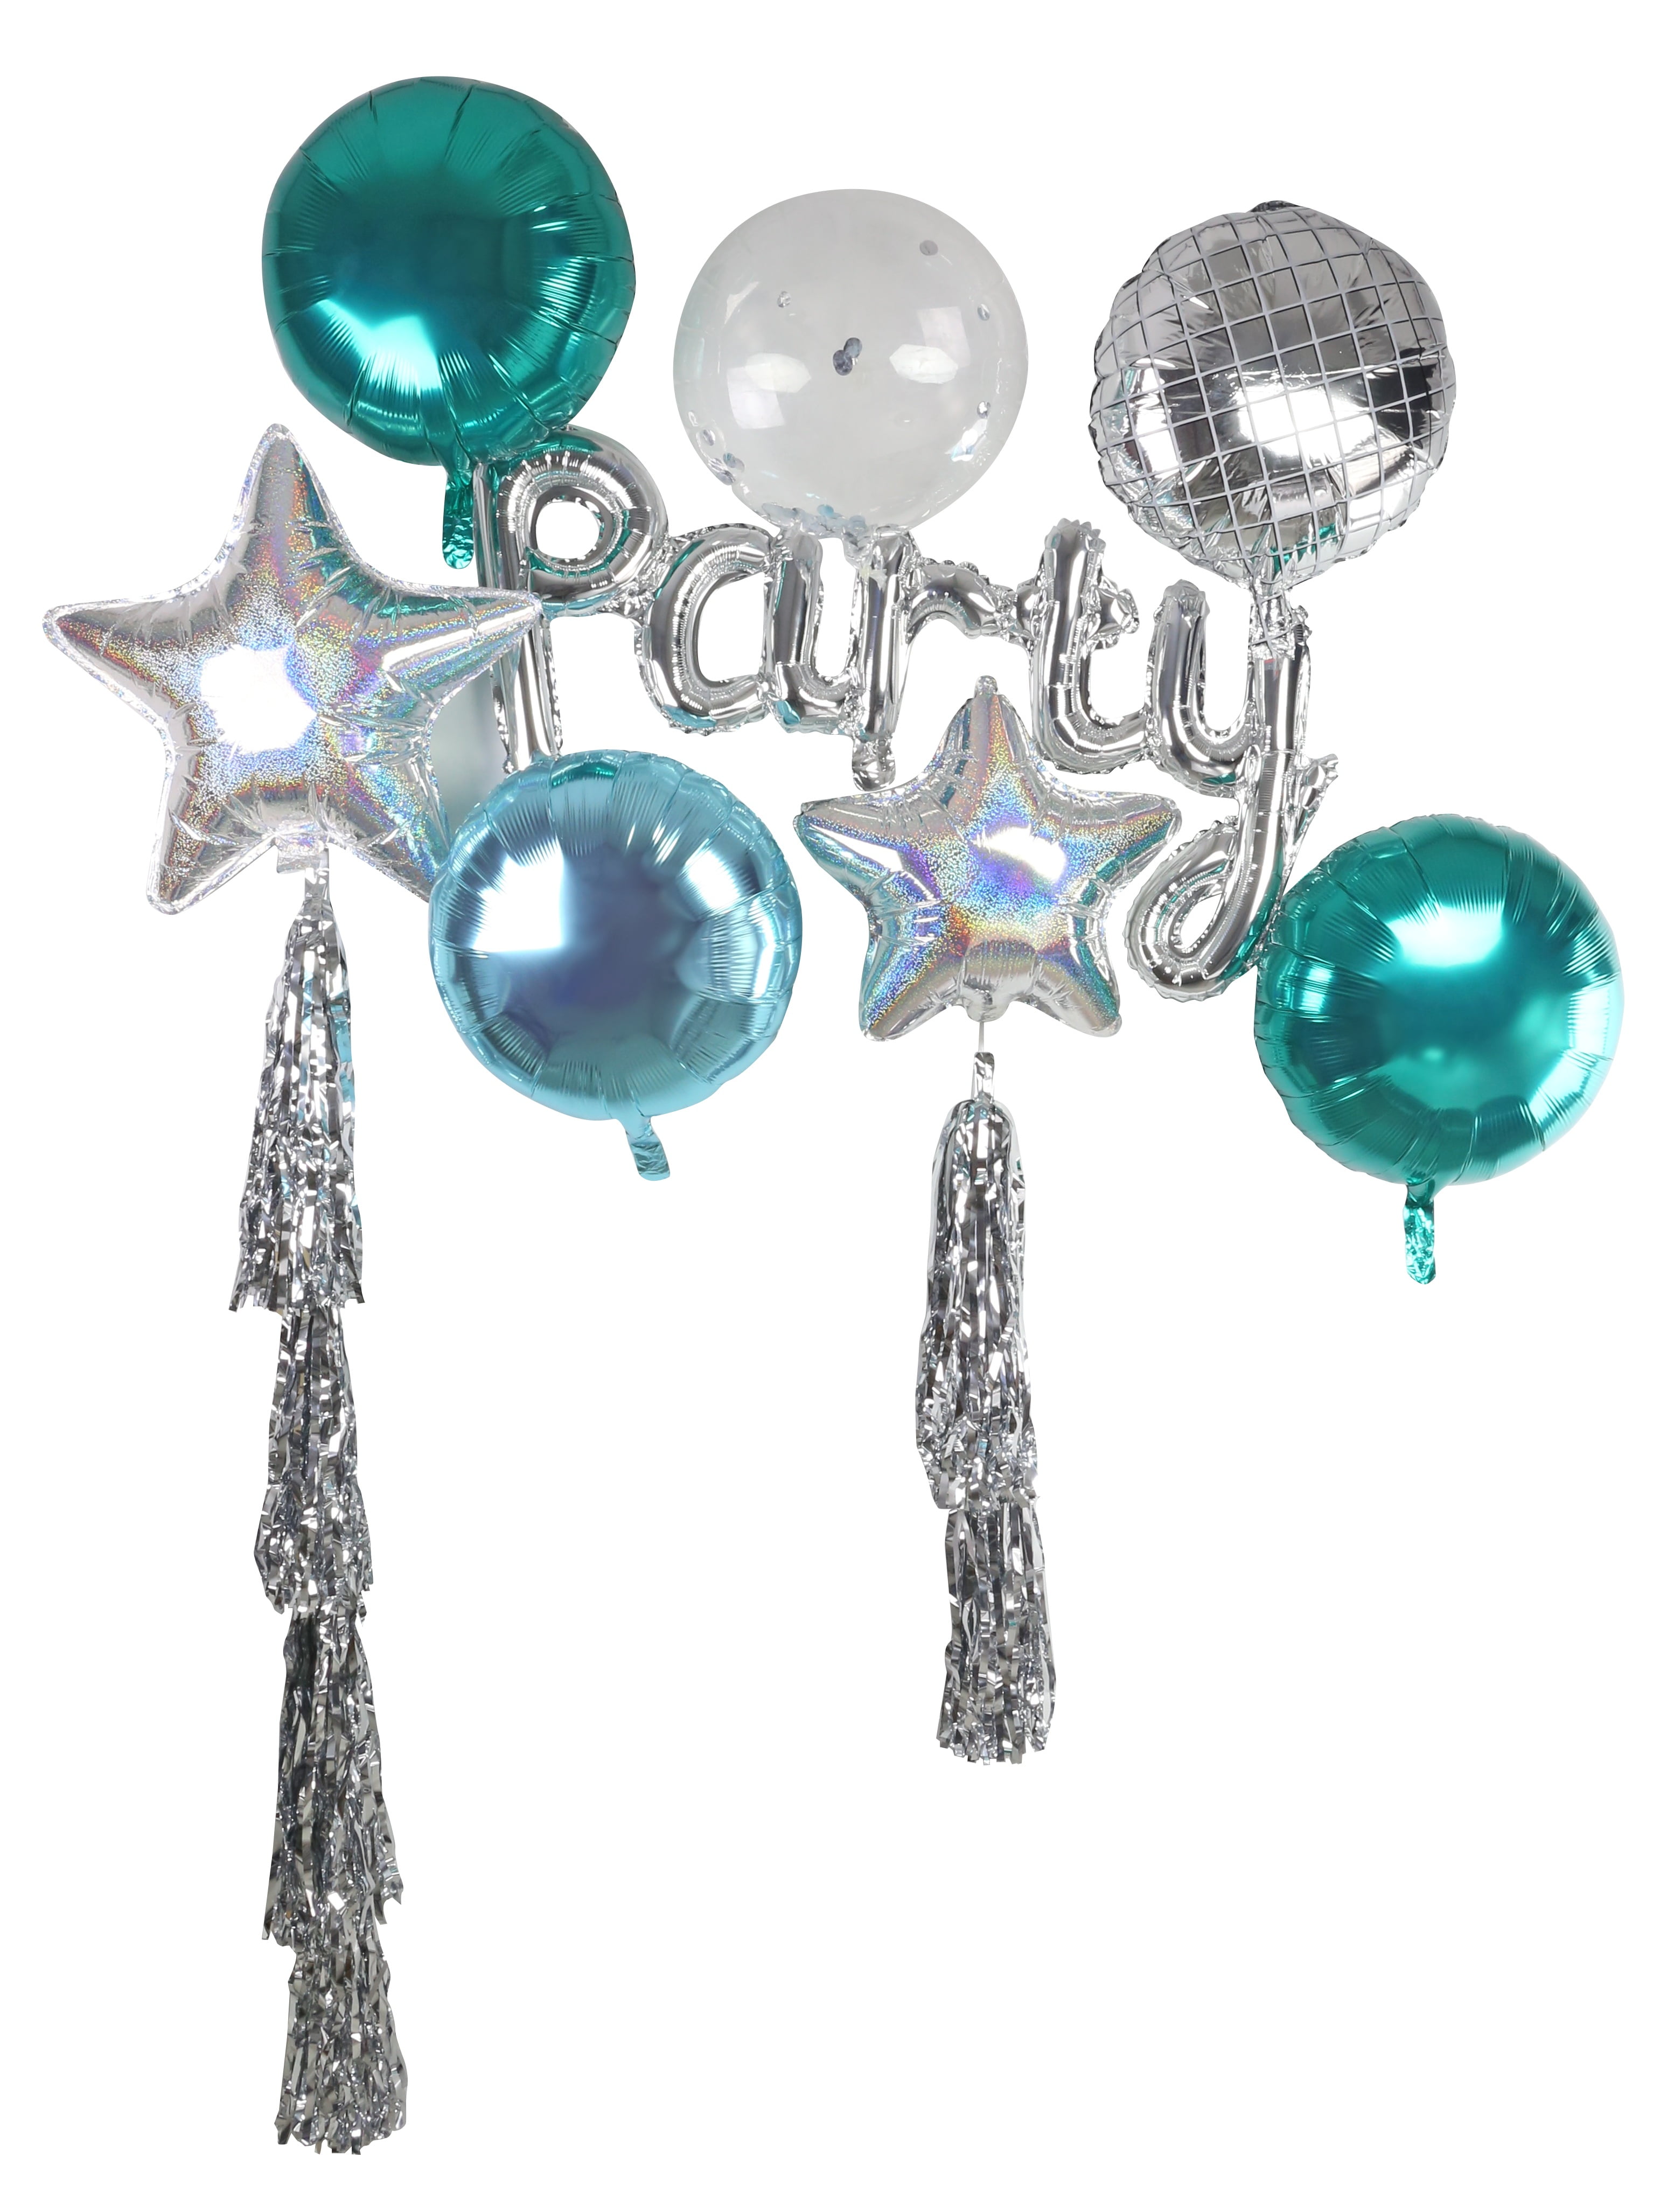 PARTY Word Shaped Foil Balloon Set, includes Streamers, 39.5in x 20in